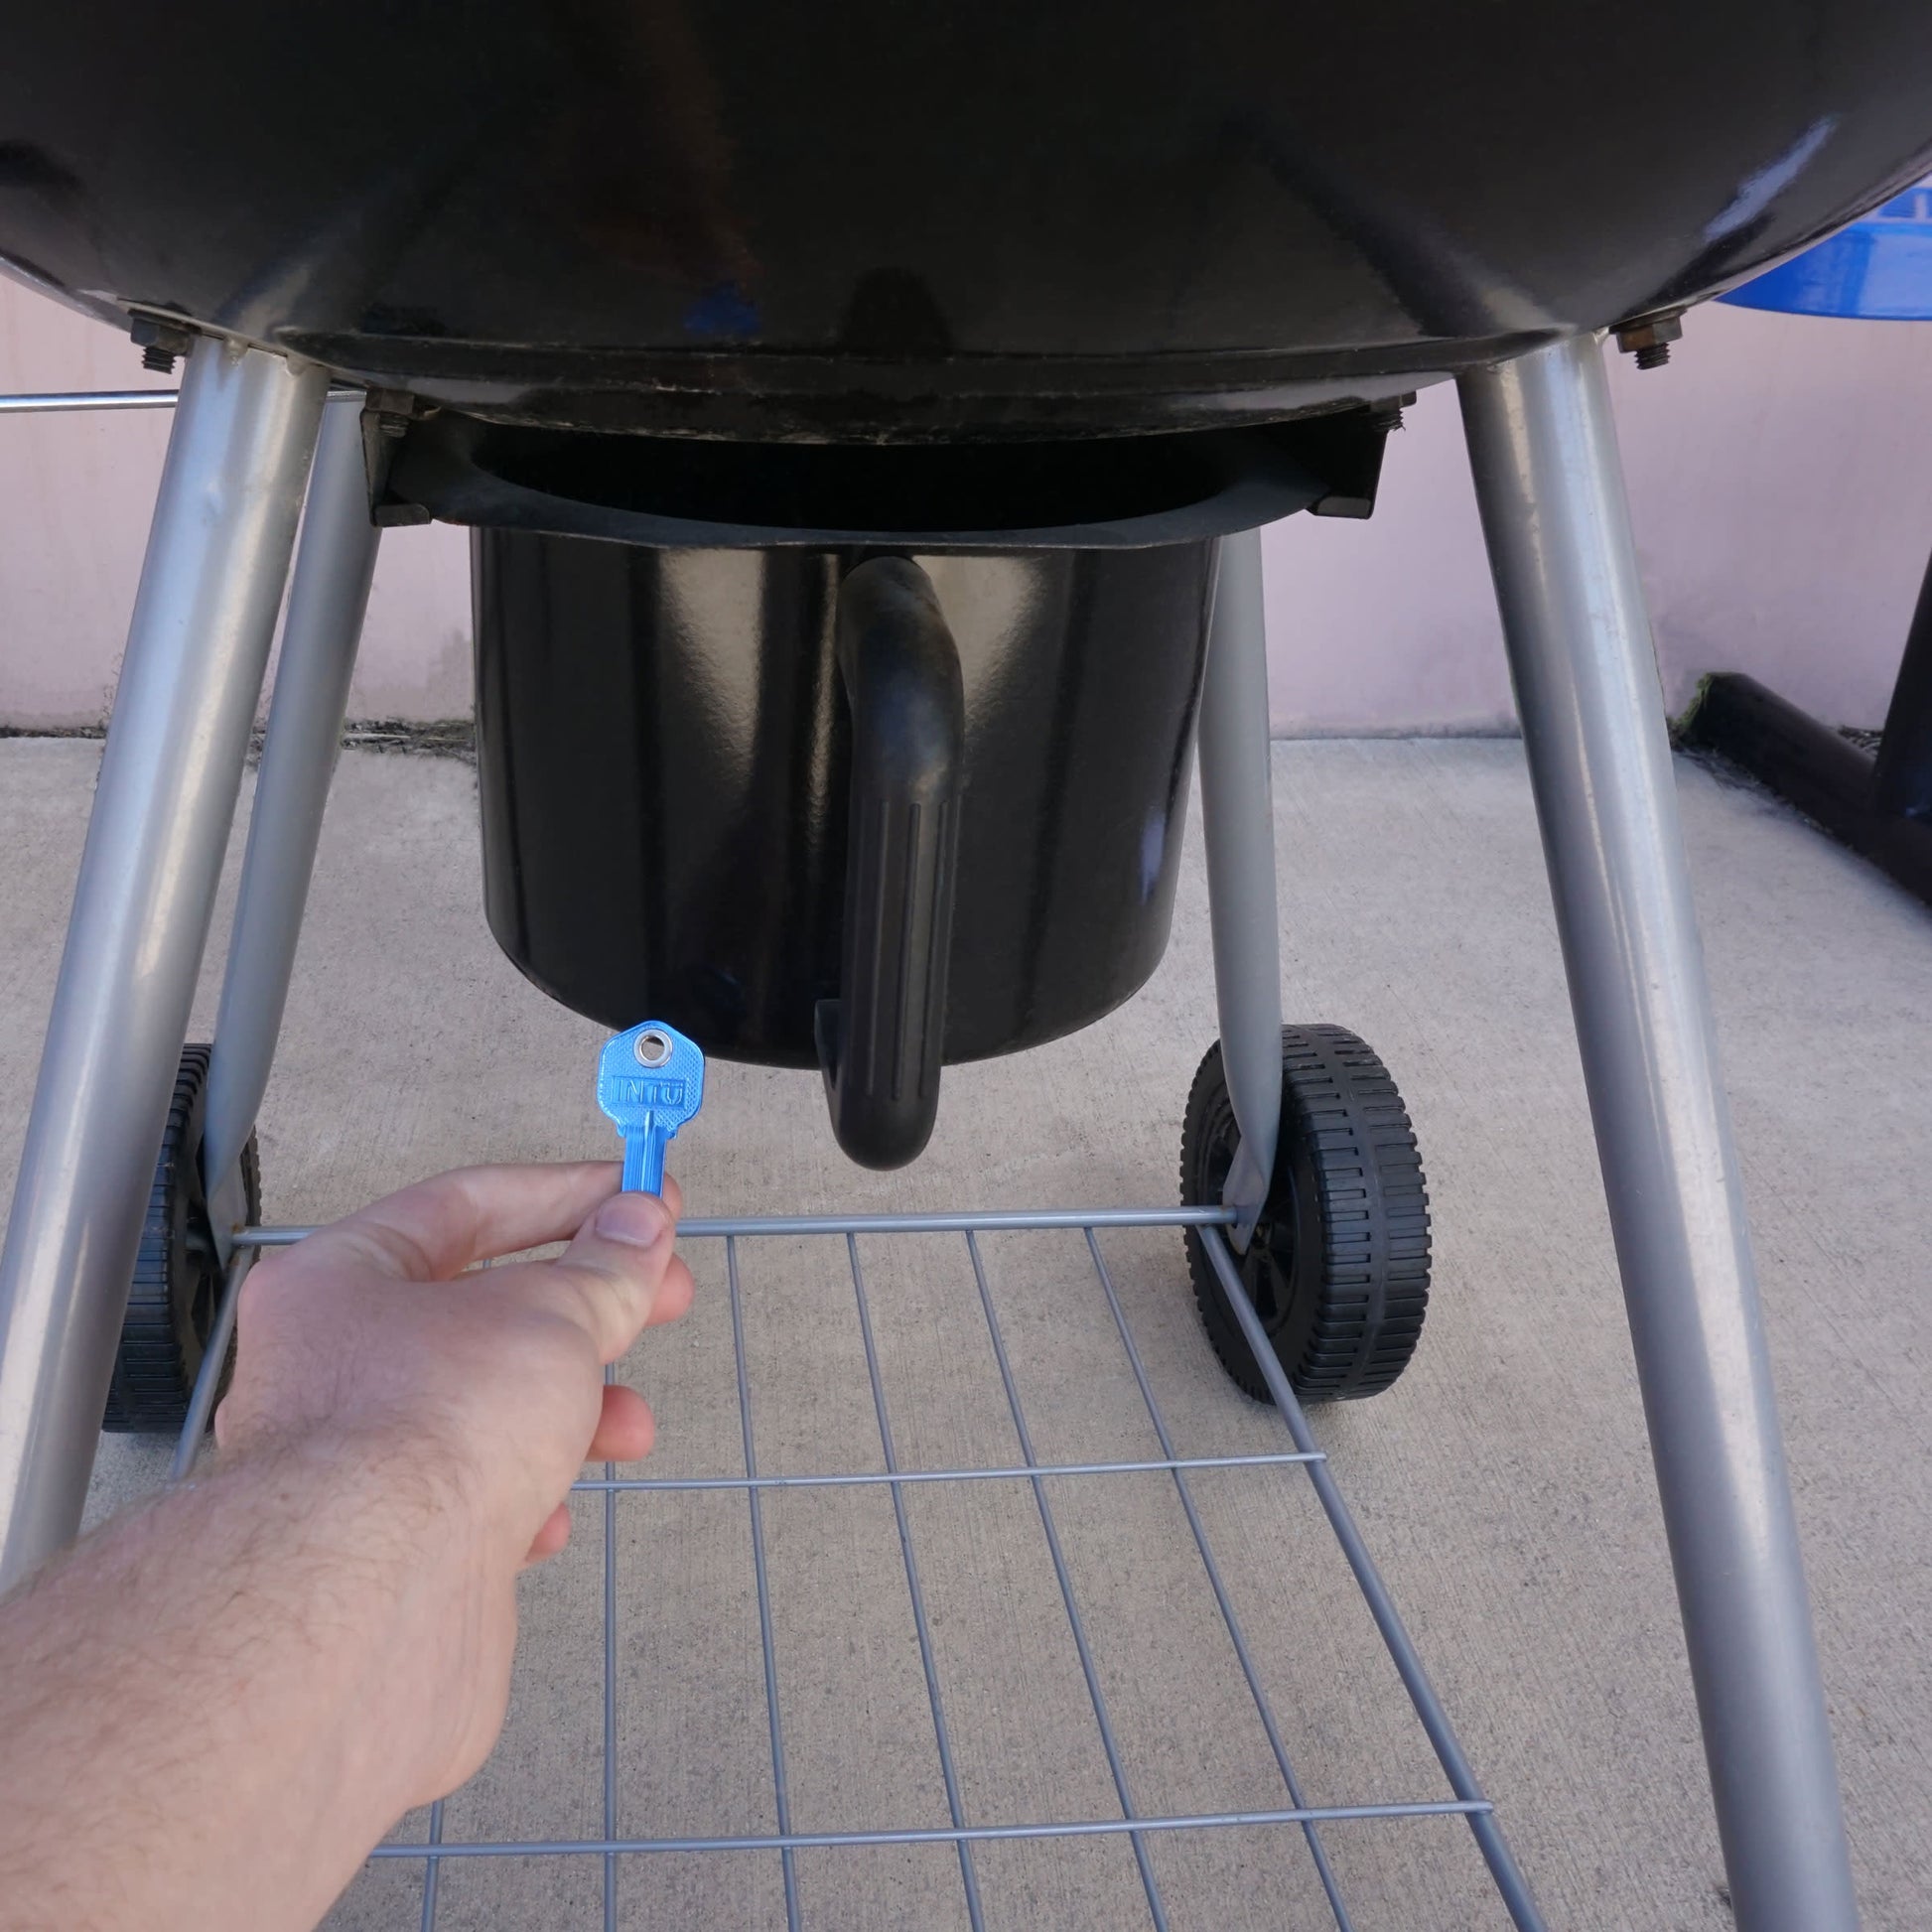 Load image into Gallery viewer, 50663 Magnetic Key, KW1-66 Blue - Hand Holding Blue Magnetic Key Beneath a Barbeque Grill